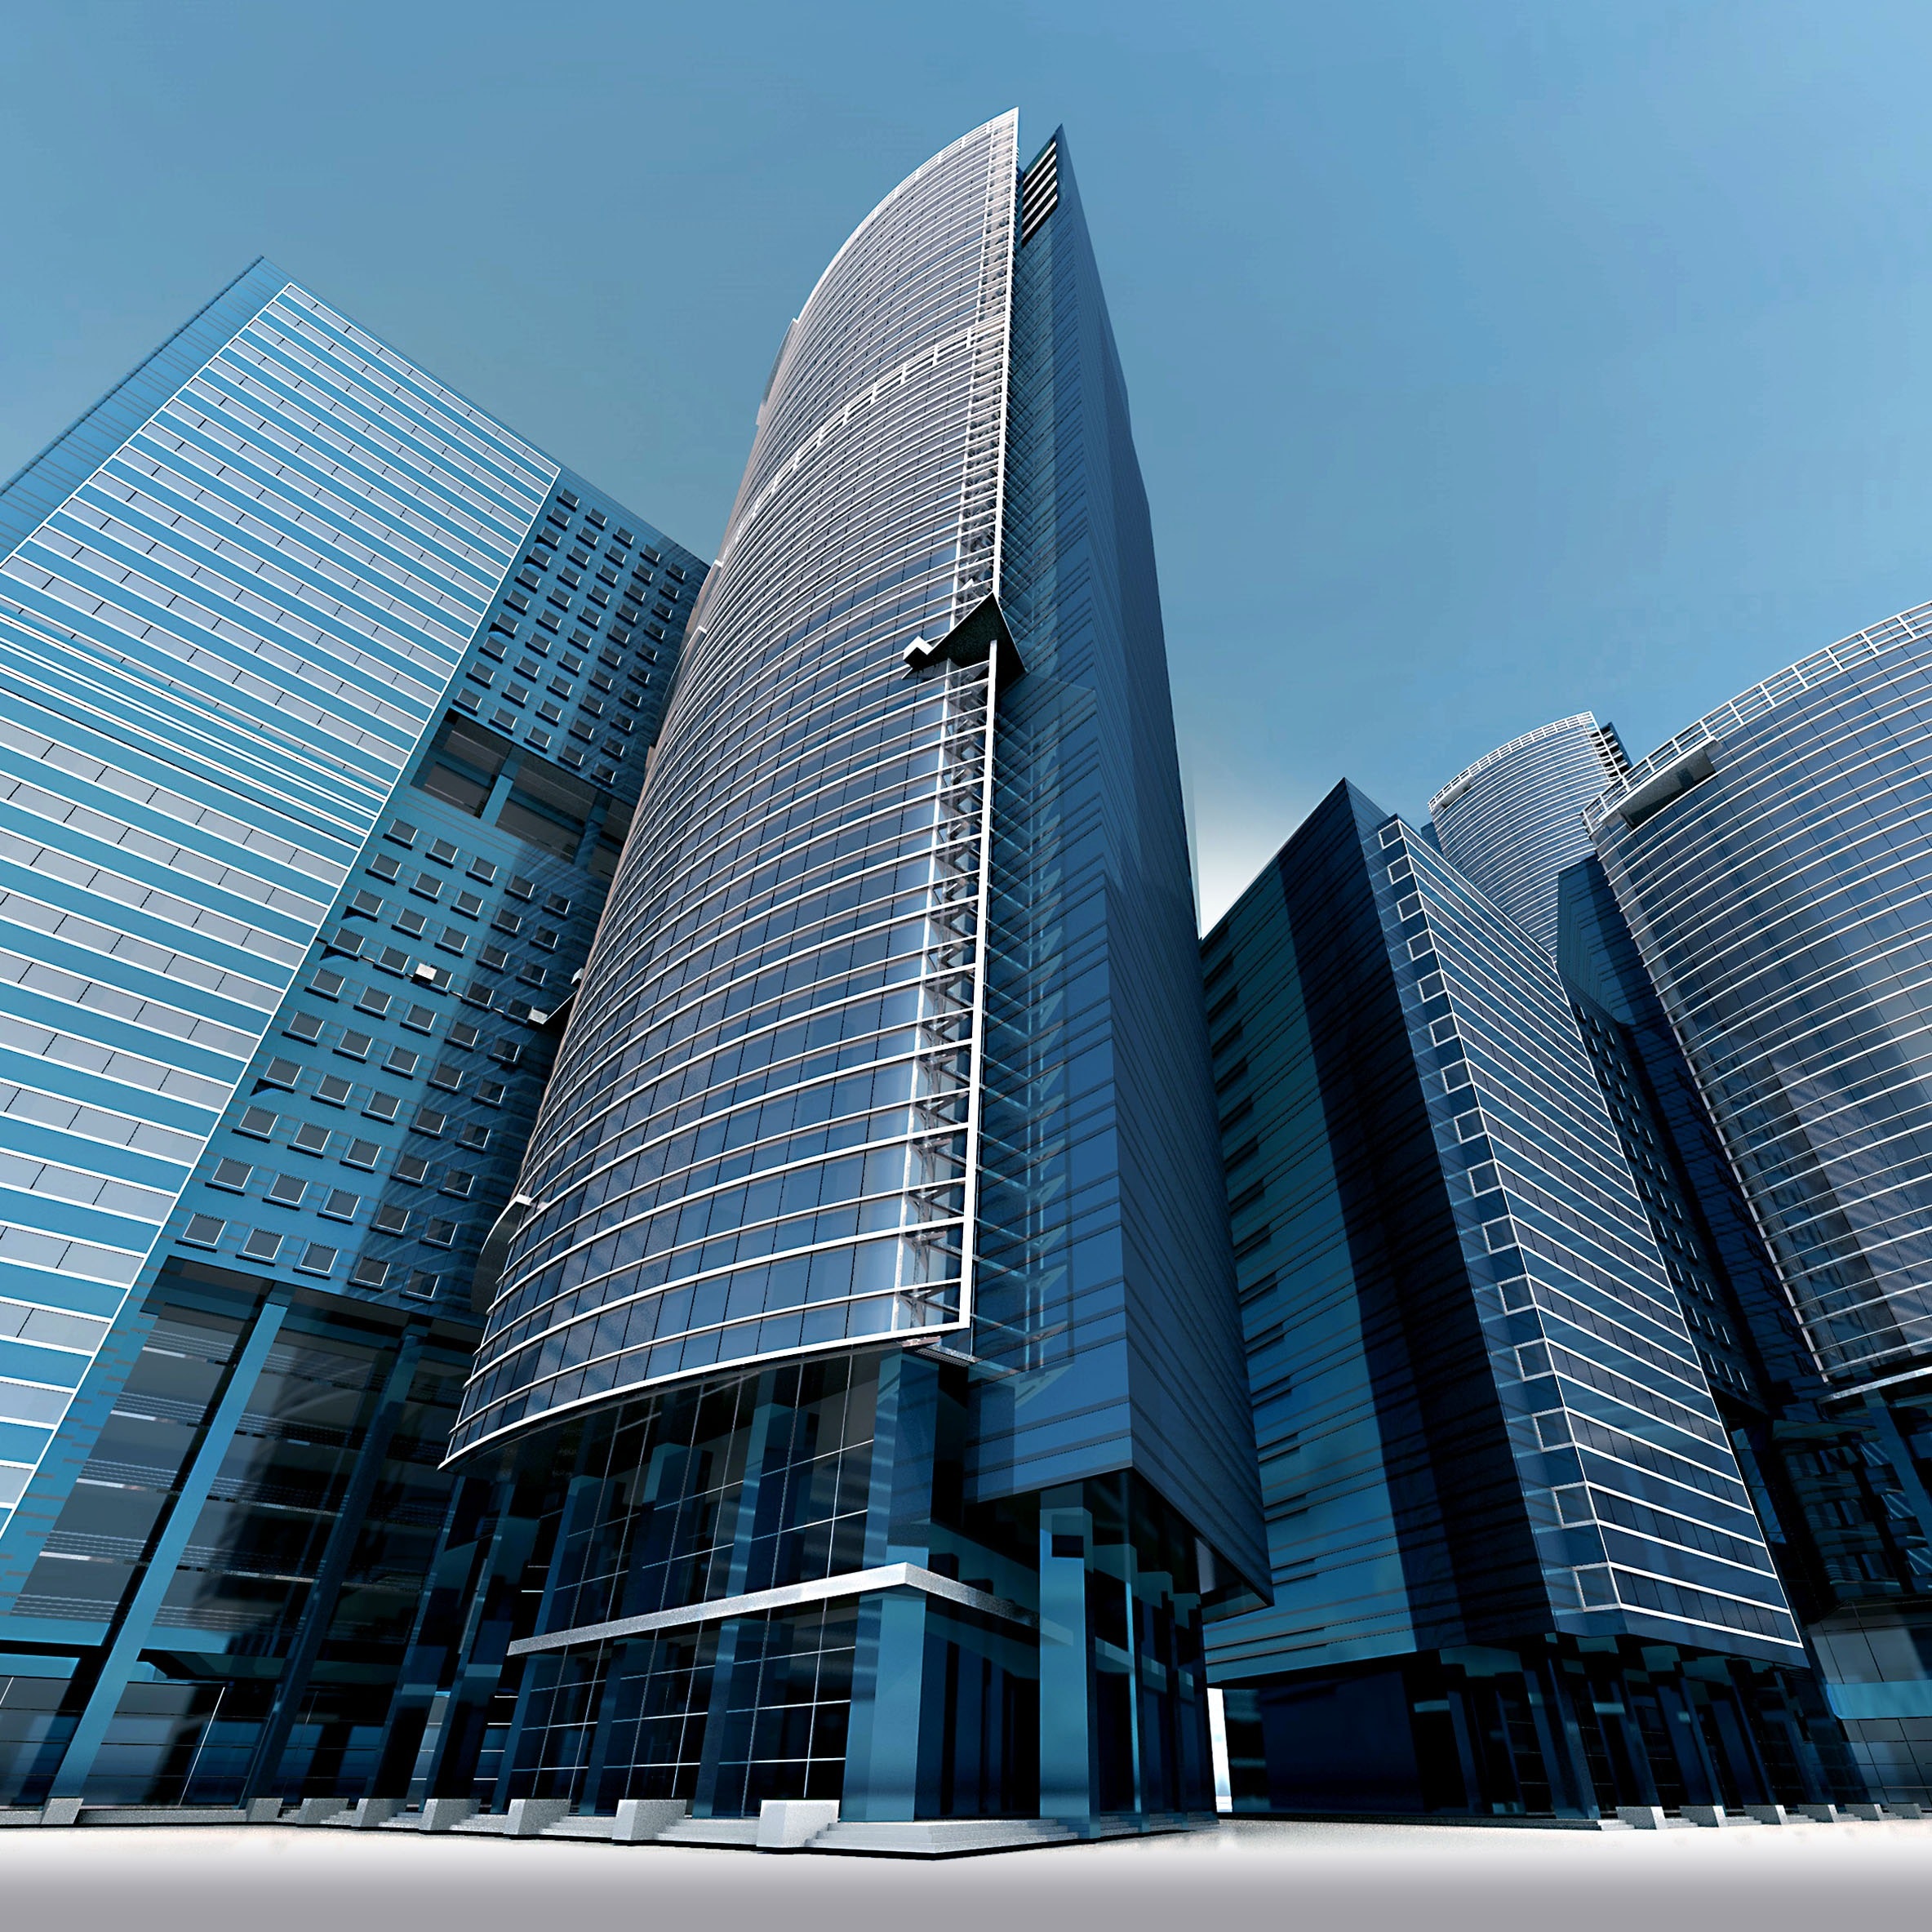 Large skyscrapers image